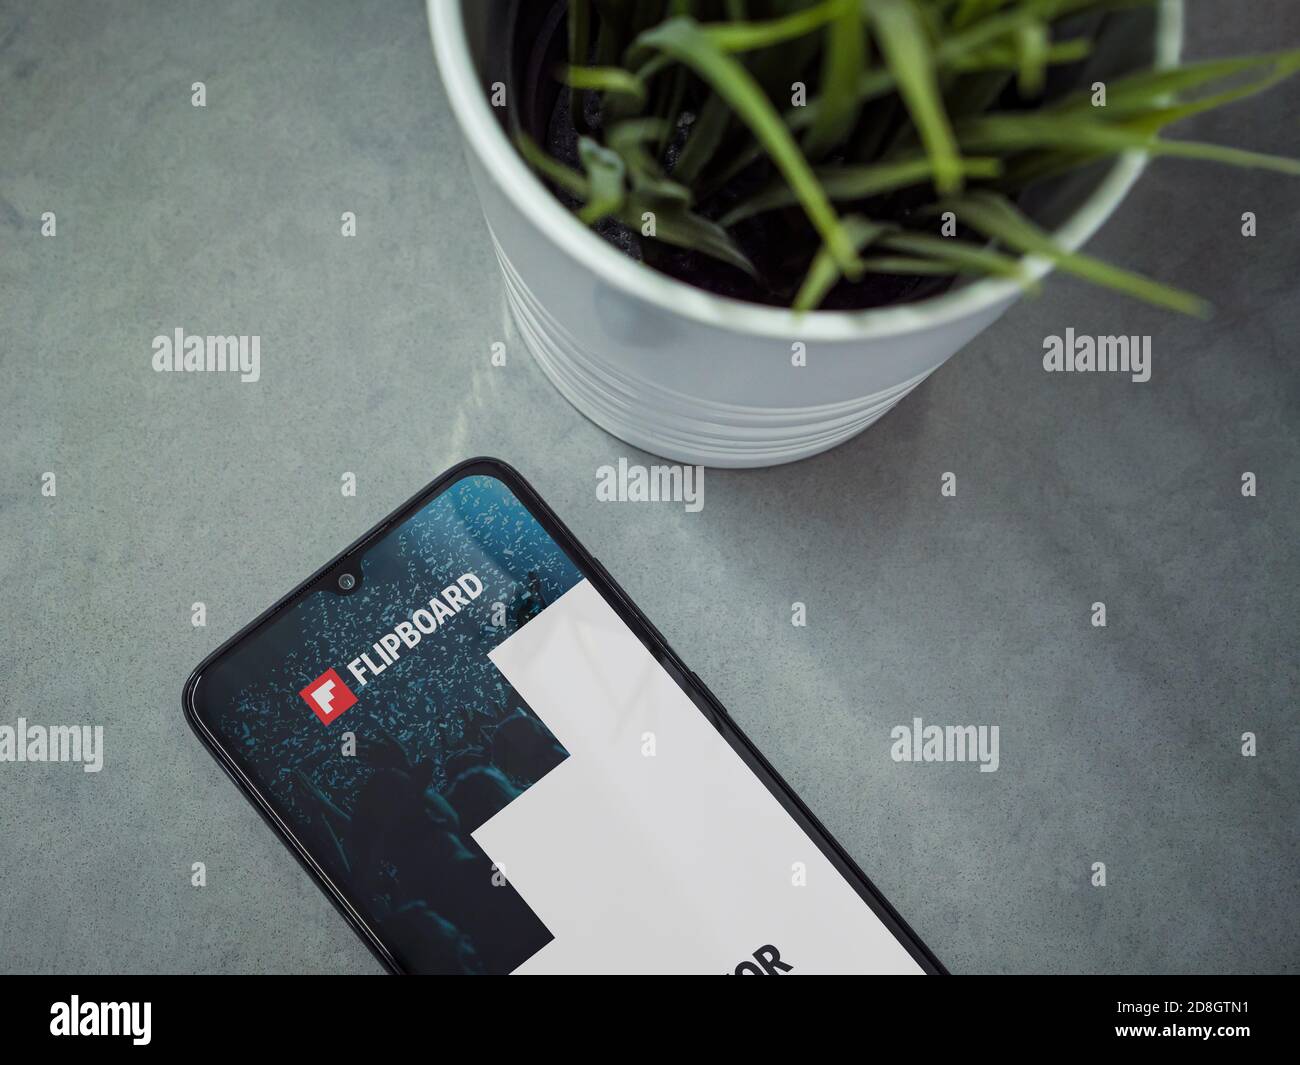 Lod, Israel - July 8, 2020: Modern minimalist office workspace with black mobile smartphone with Flipboard app launch screen with logo on marble backg Stock Photo